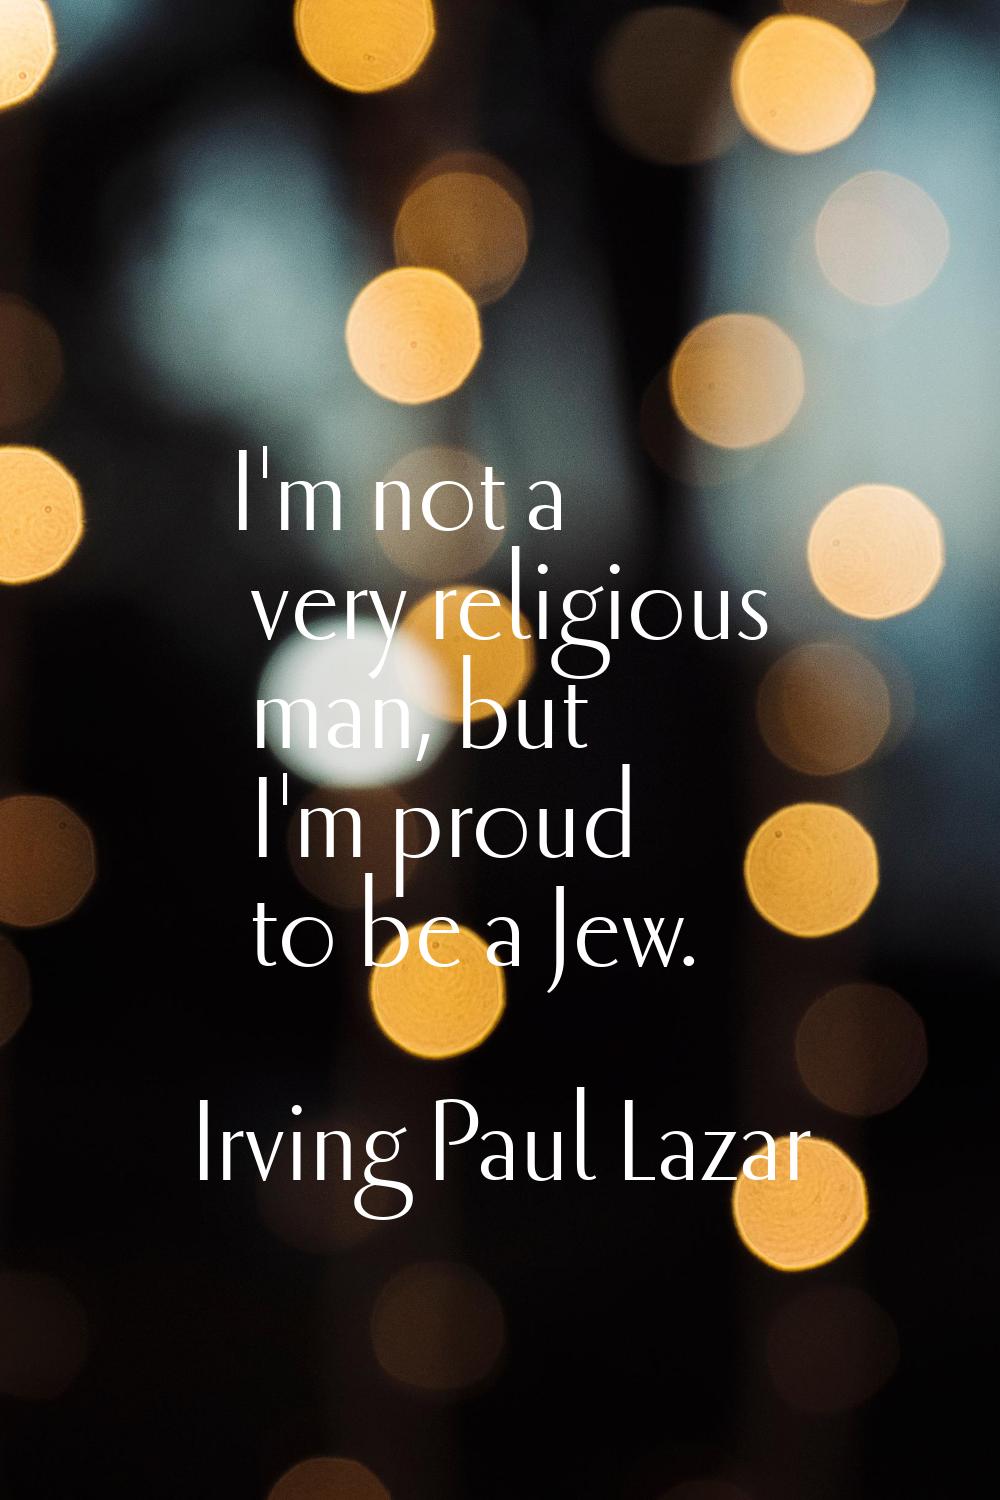 I'm not a very religious man, but I'm proud to be a Jew.